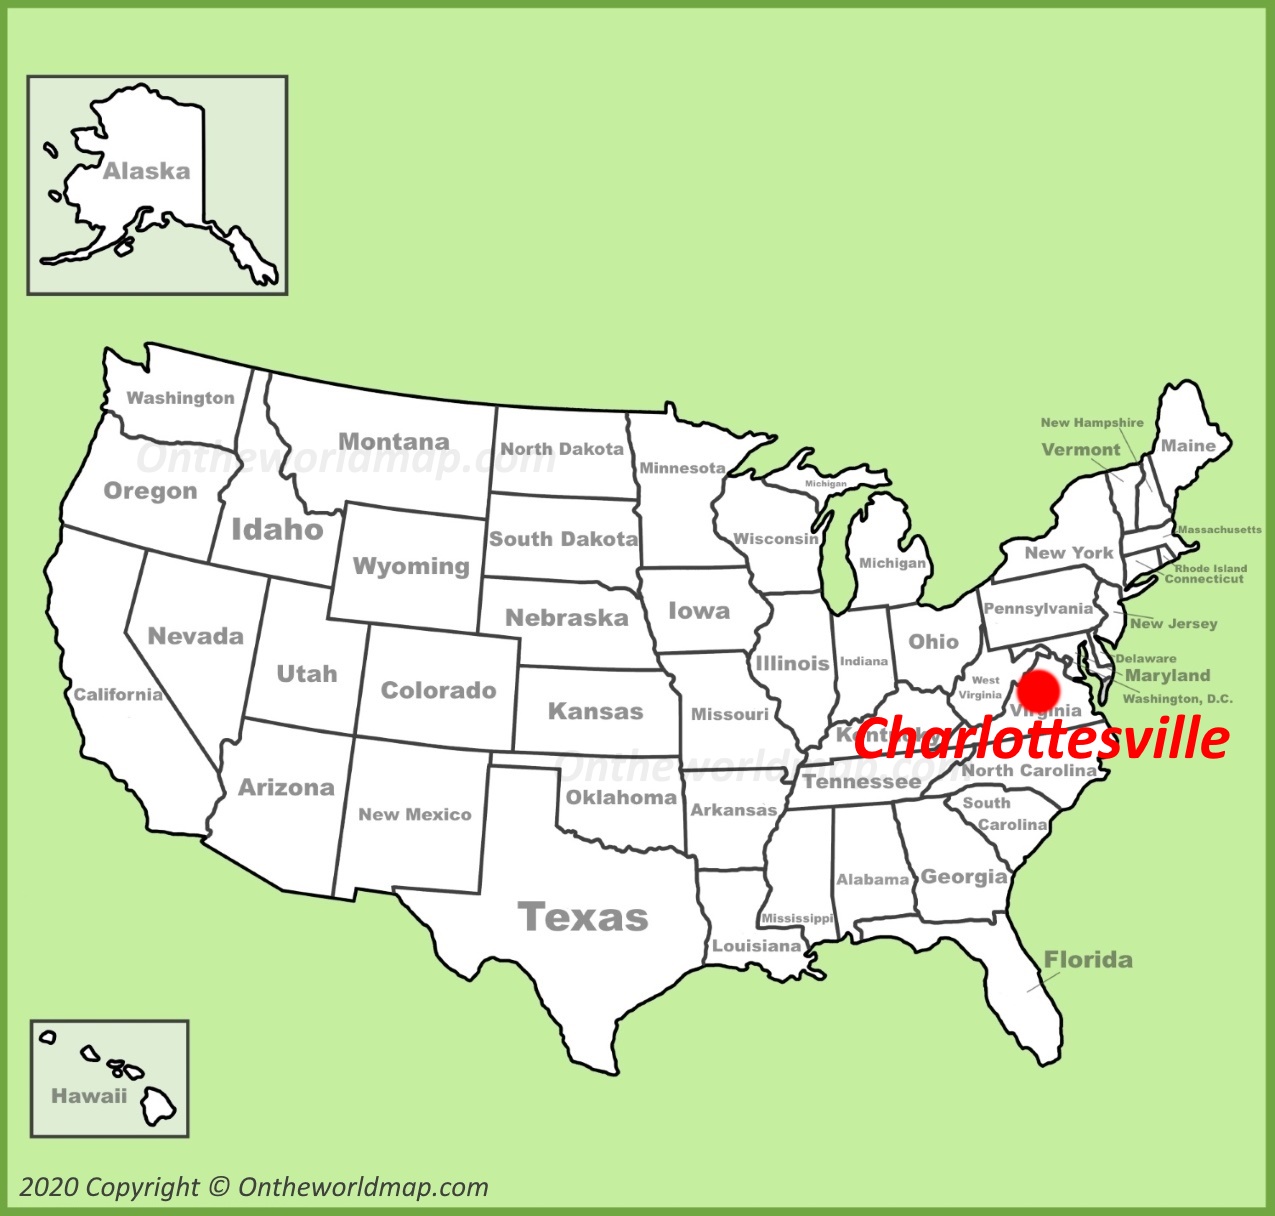 Charlottesville Location On The Us Map 